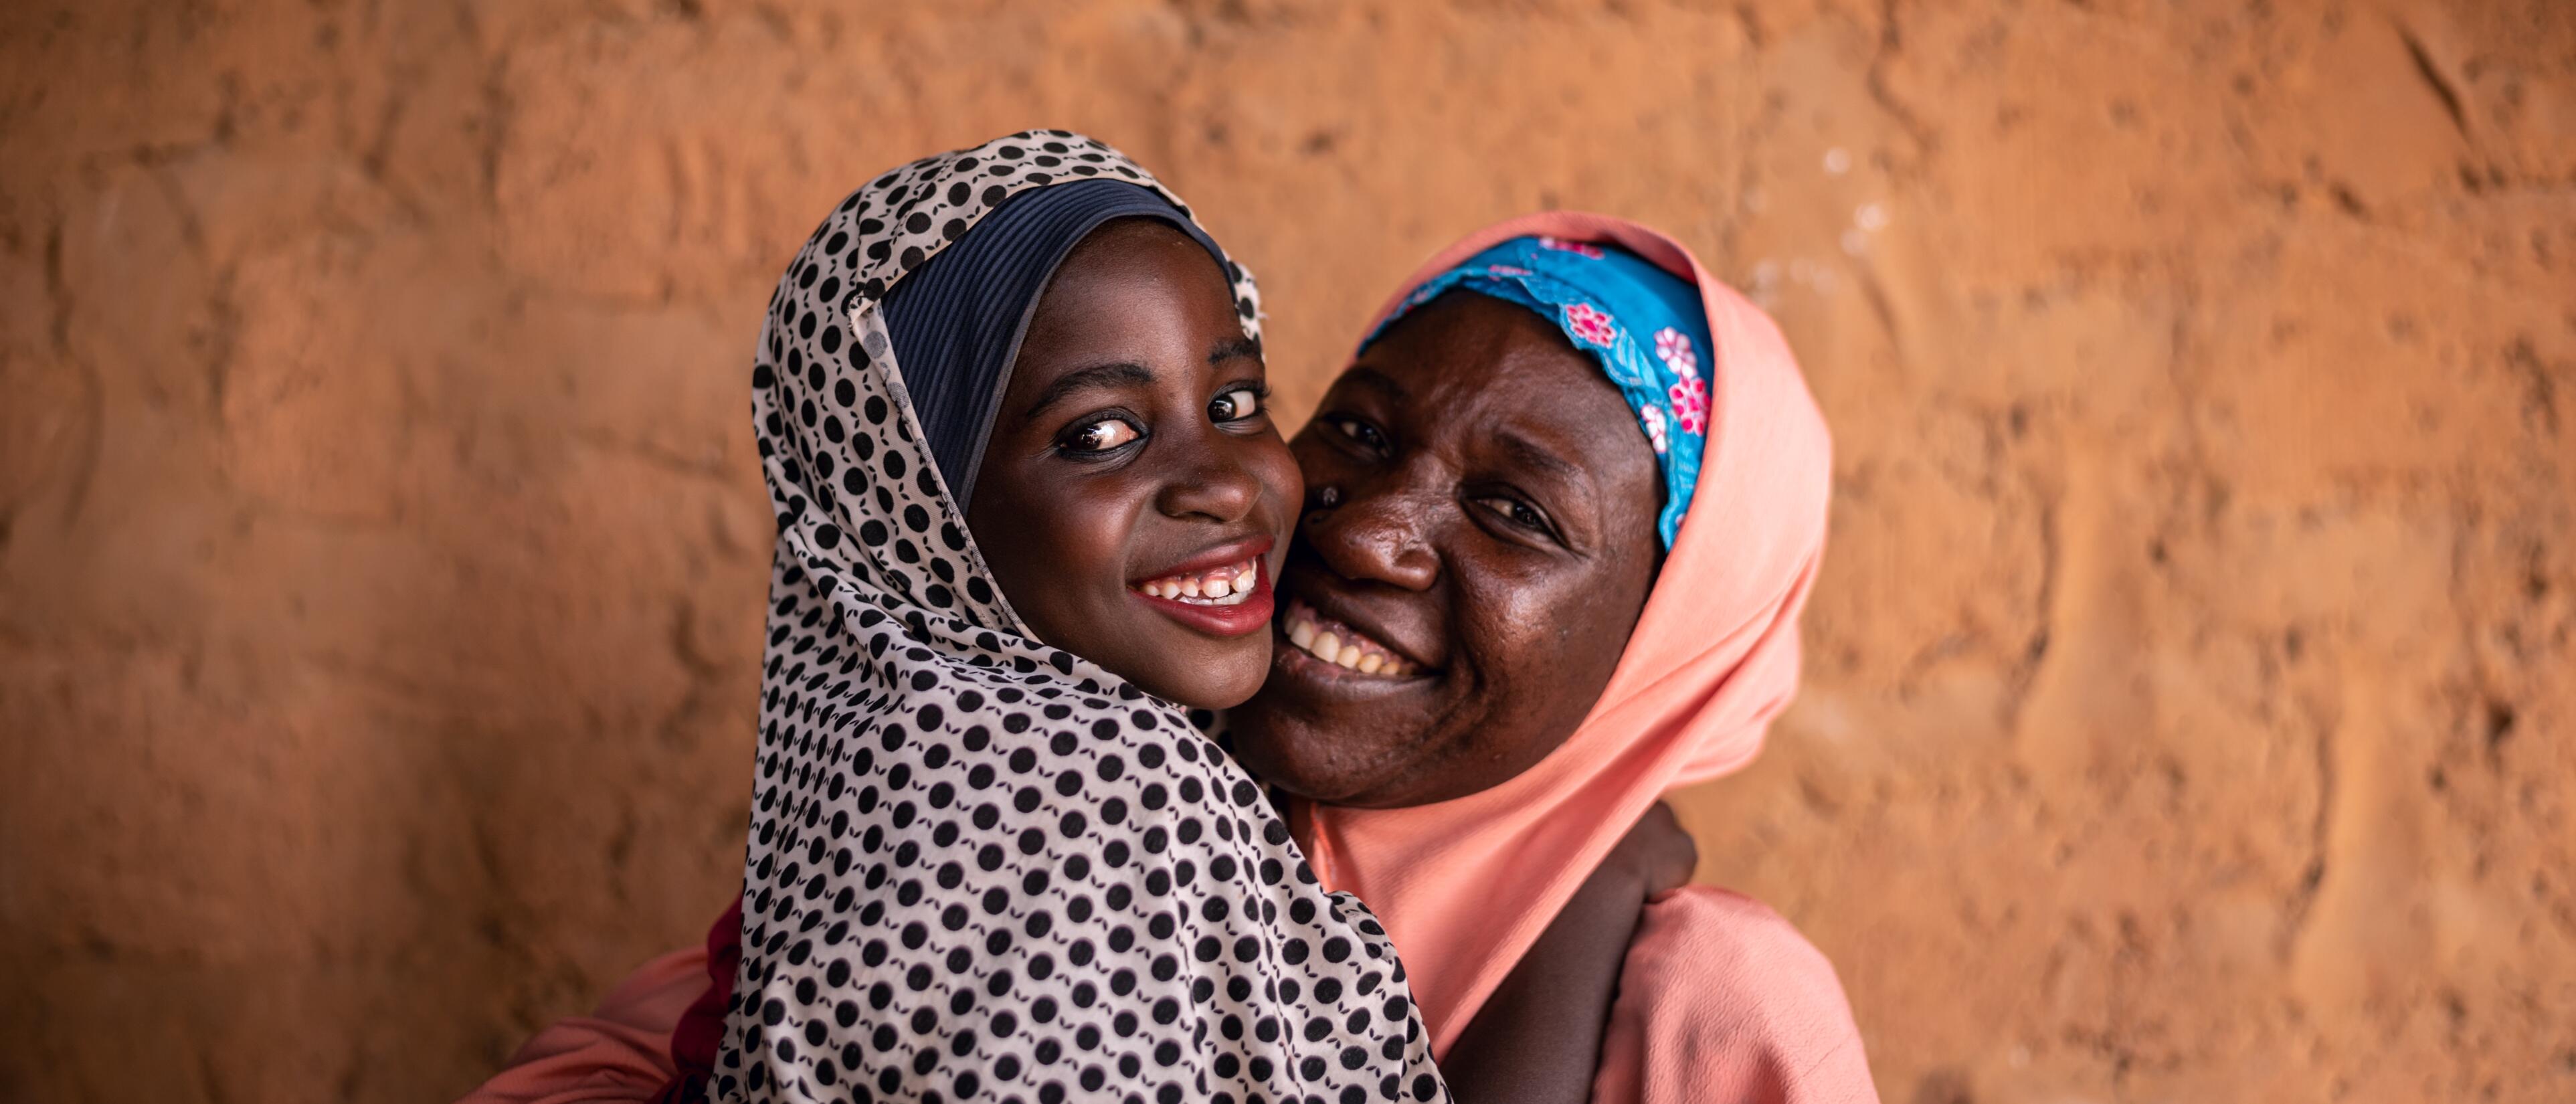 Fatima, age 8, hugs her mother before going to school.